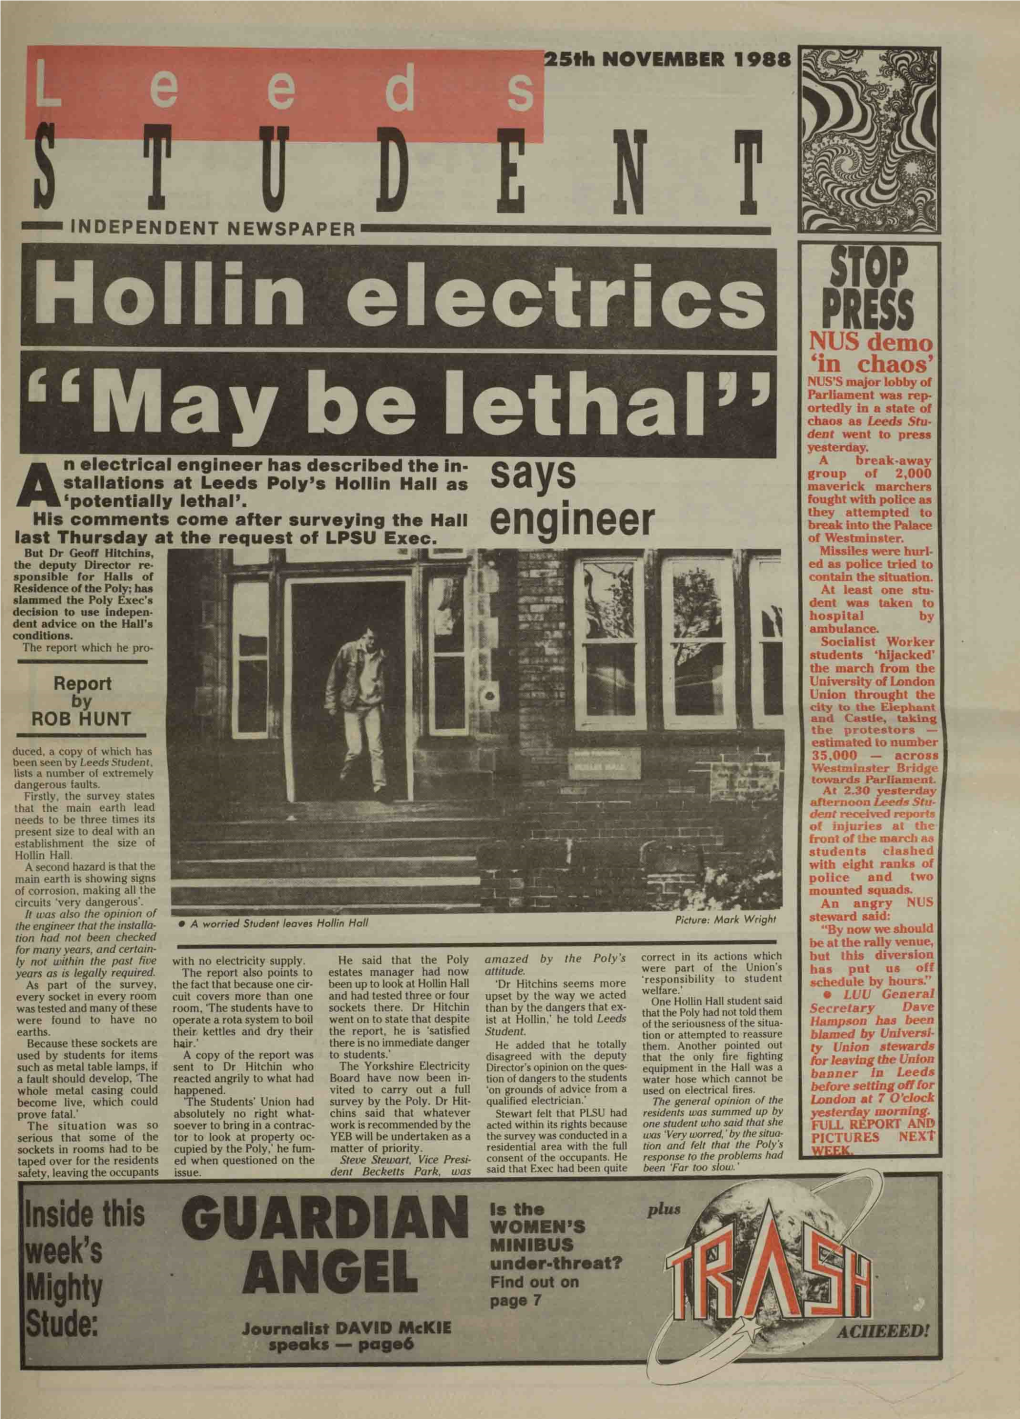 Hollin Electrics "May Be Lethal"